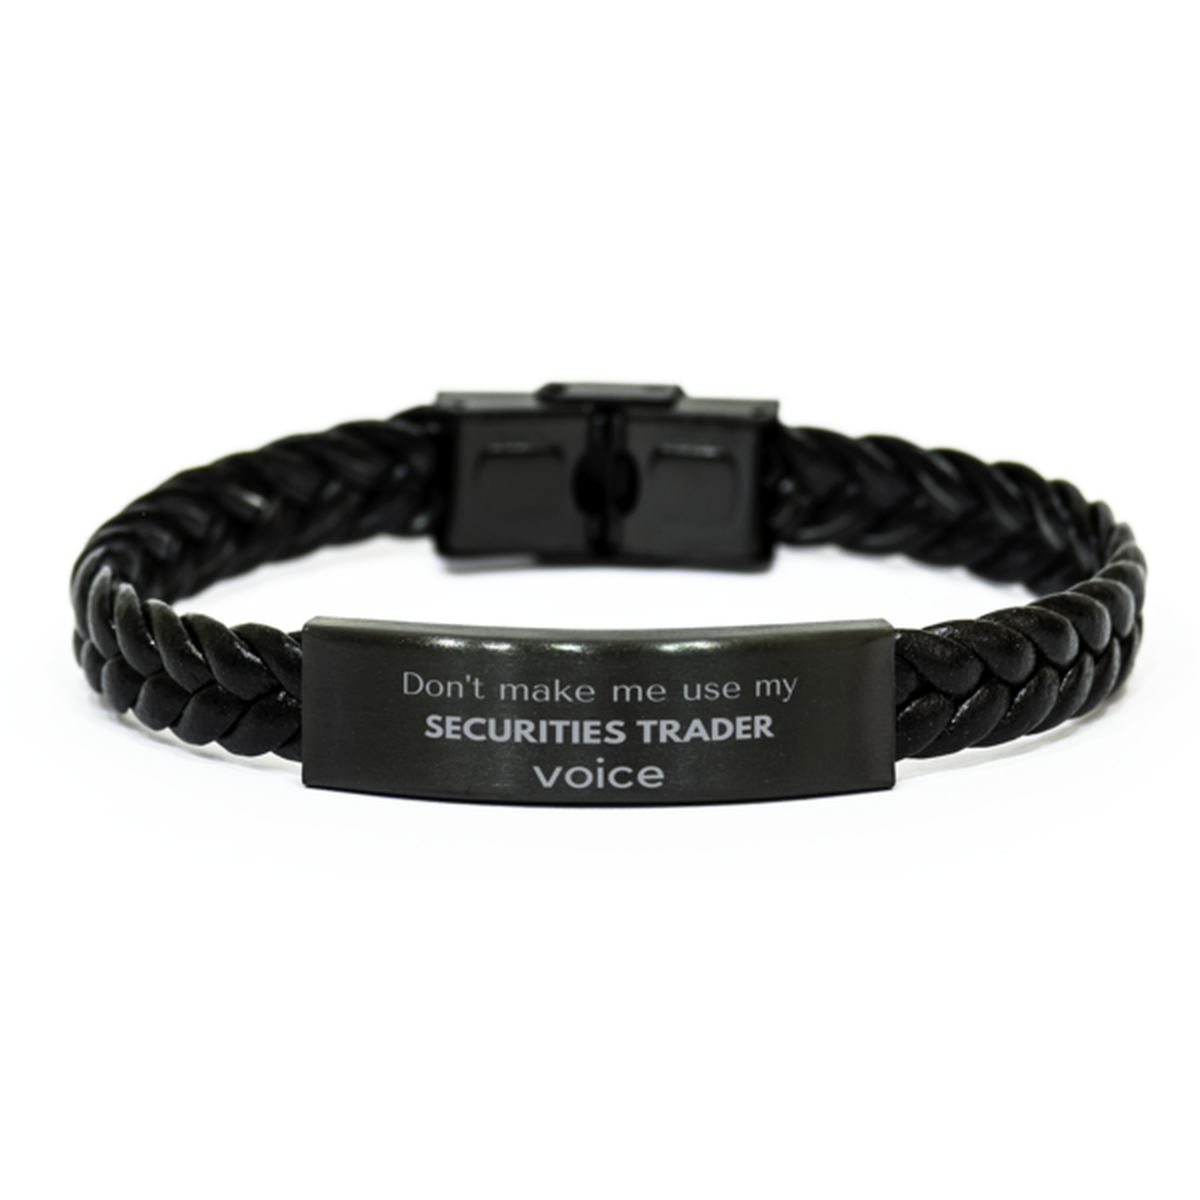 Don't make me use my Securities Trader voice, Sarcasm Securities Trader Gifts, Christmas Securities Trader Braided Leather Bracelet Birthday Unique Gifts For Securities Trader Coworkers, Men, Women, Colleague, Friends